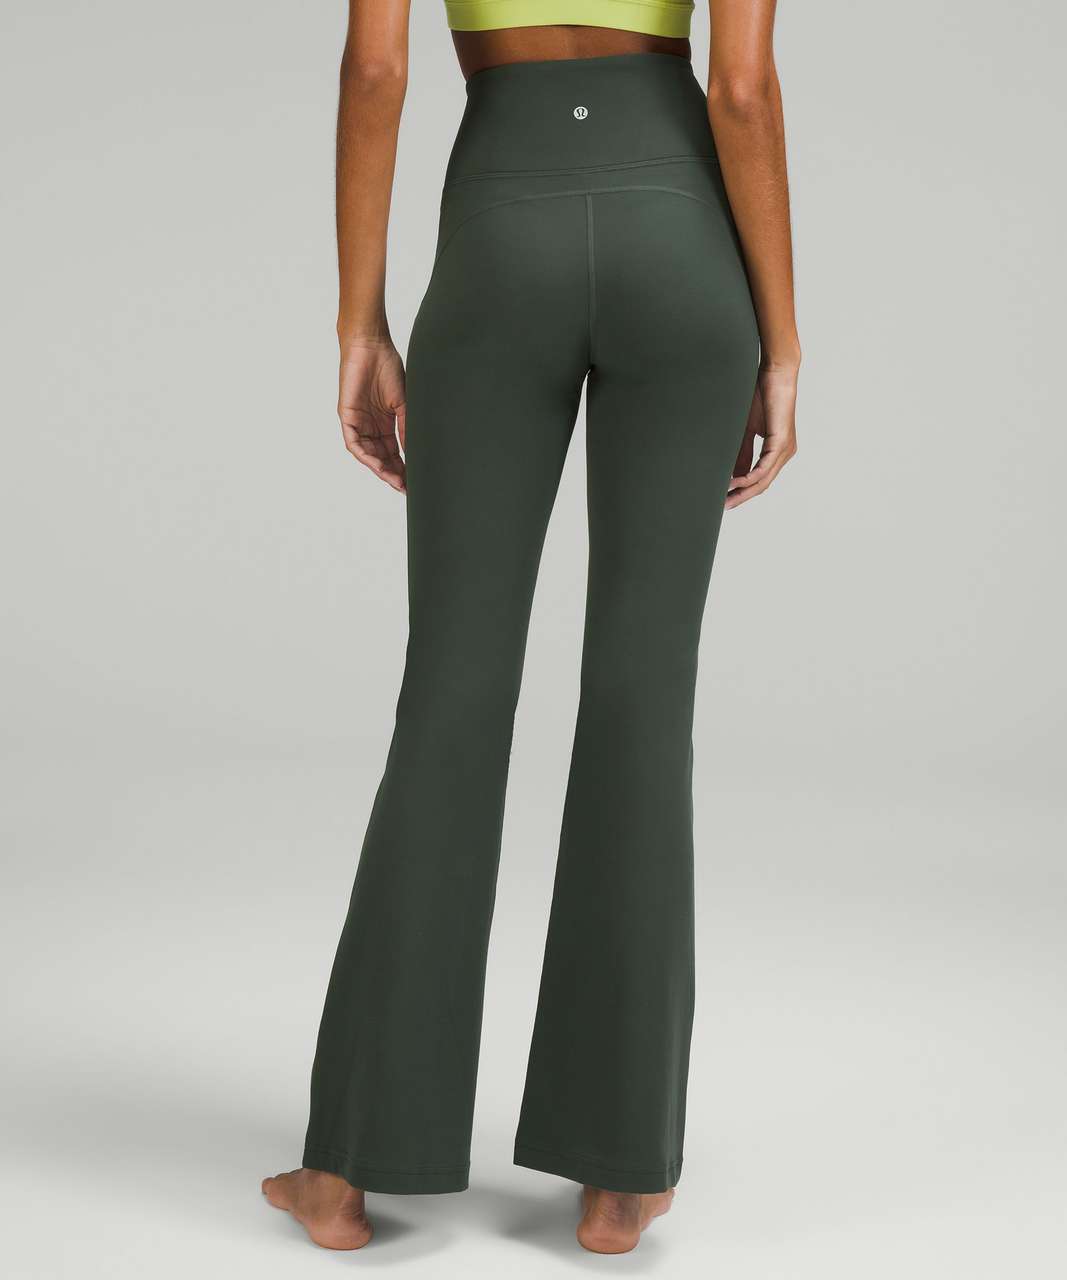 Lululemon Groove Super-High-Rise Flared Pant *Nulu - Smoked Spruce